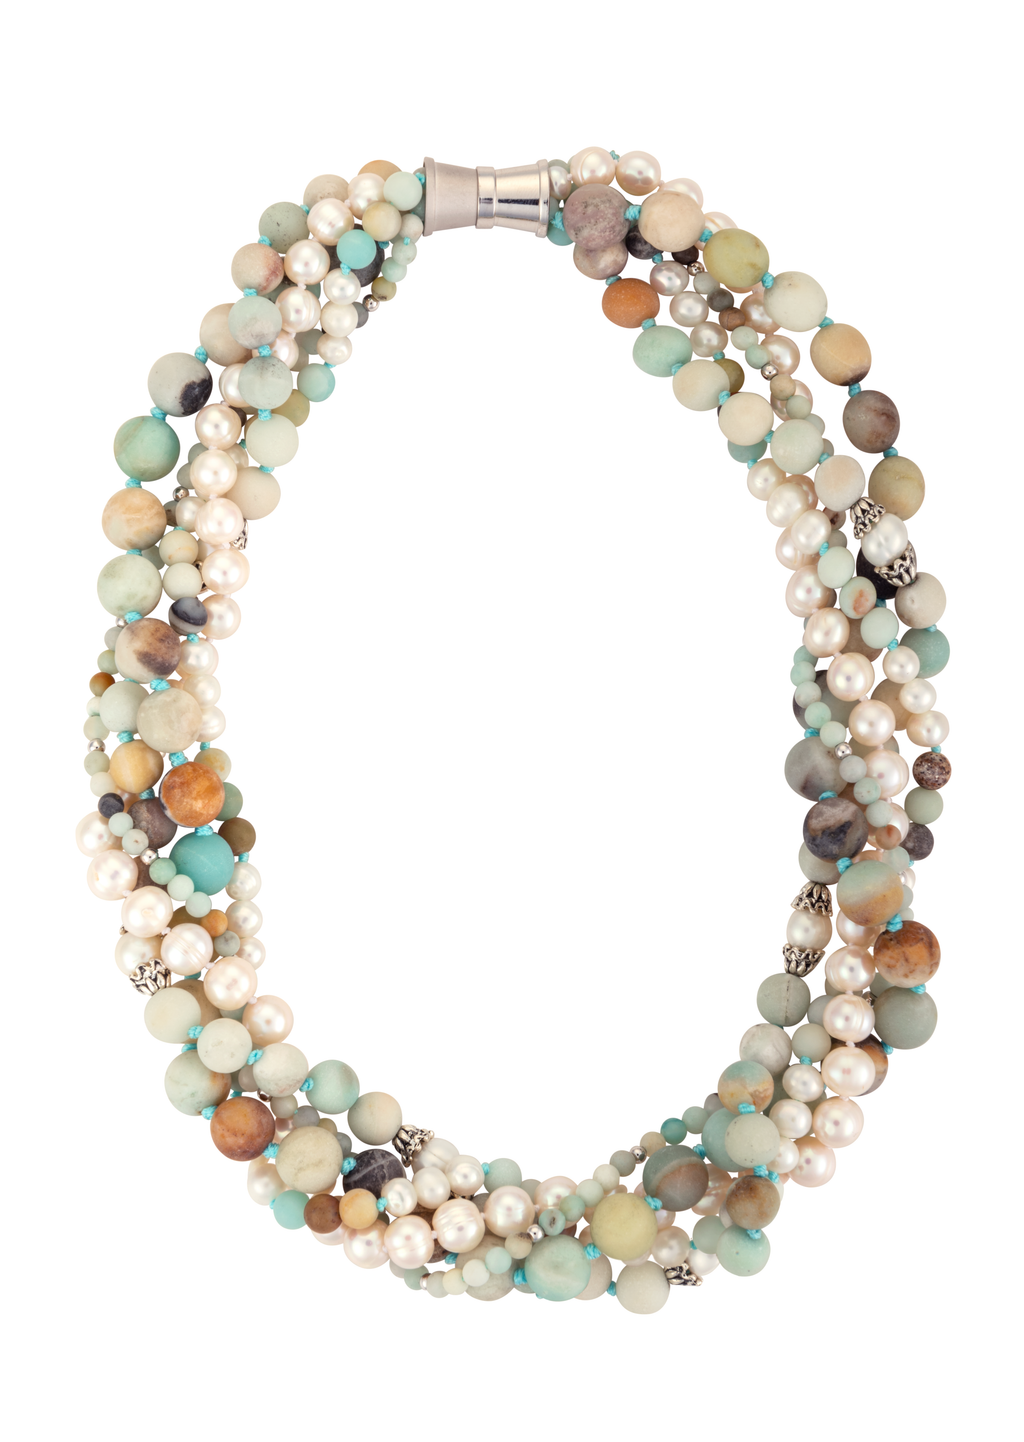 Five-strand amazonite and pearl necklace